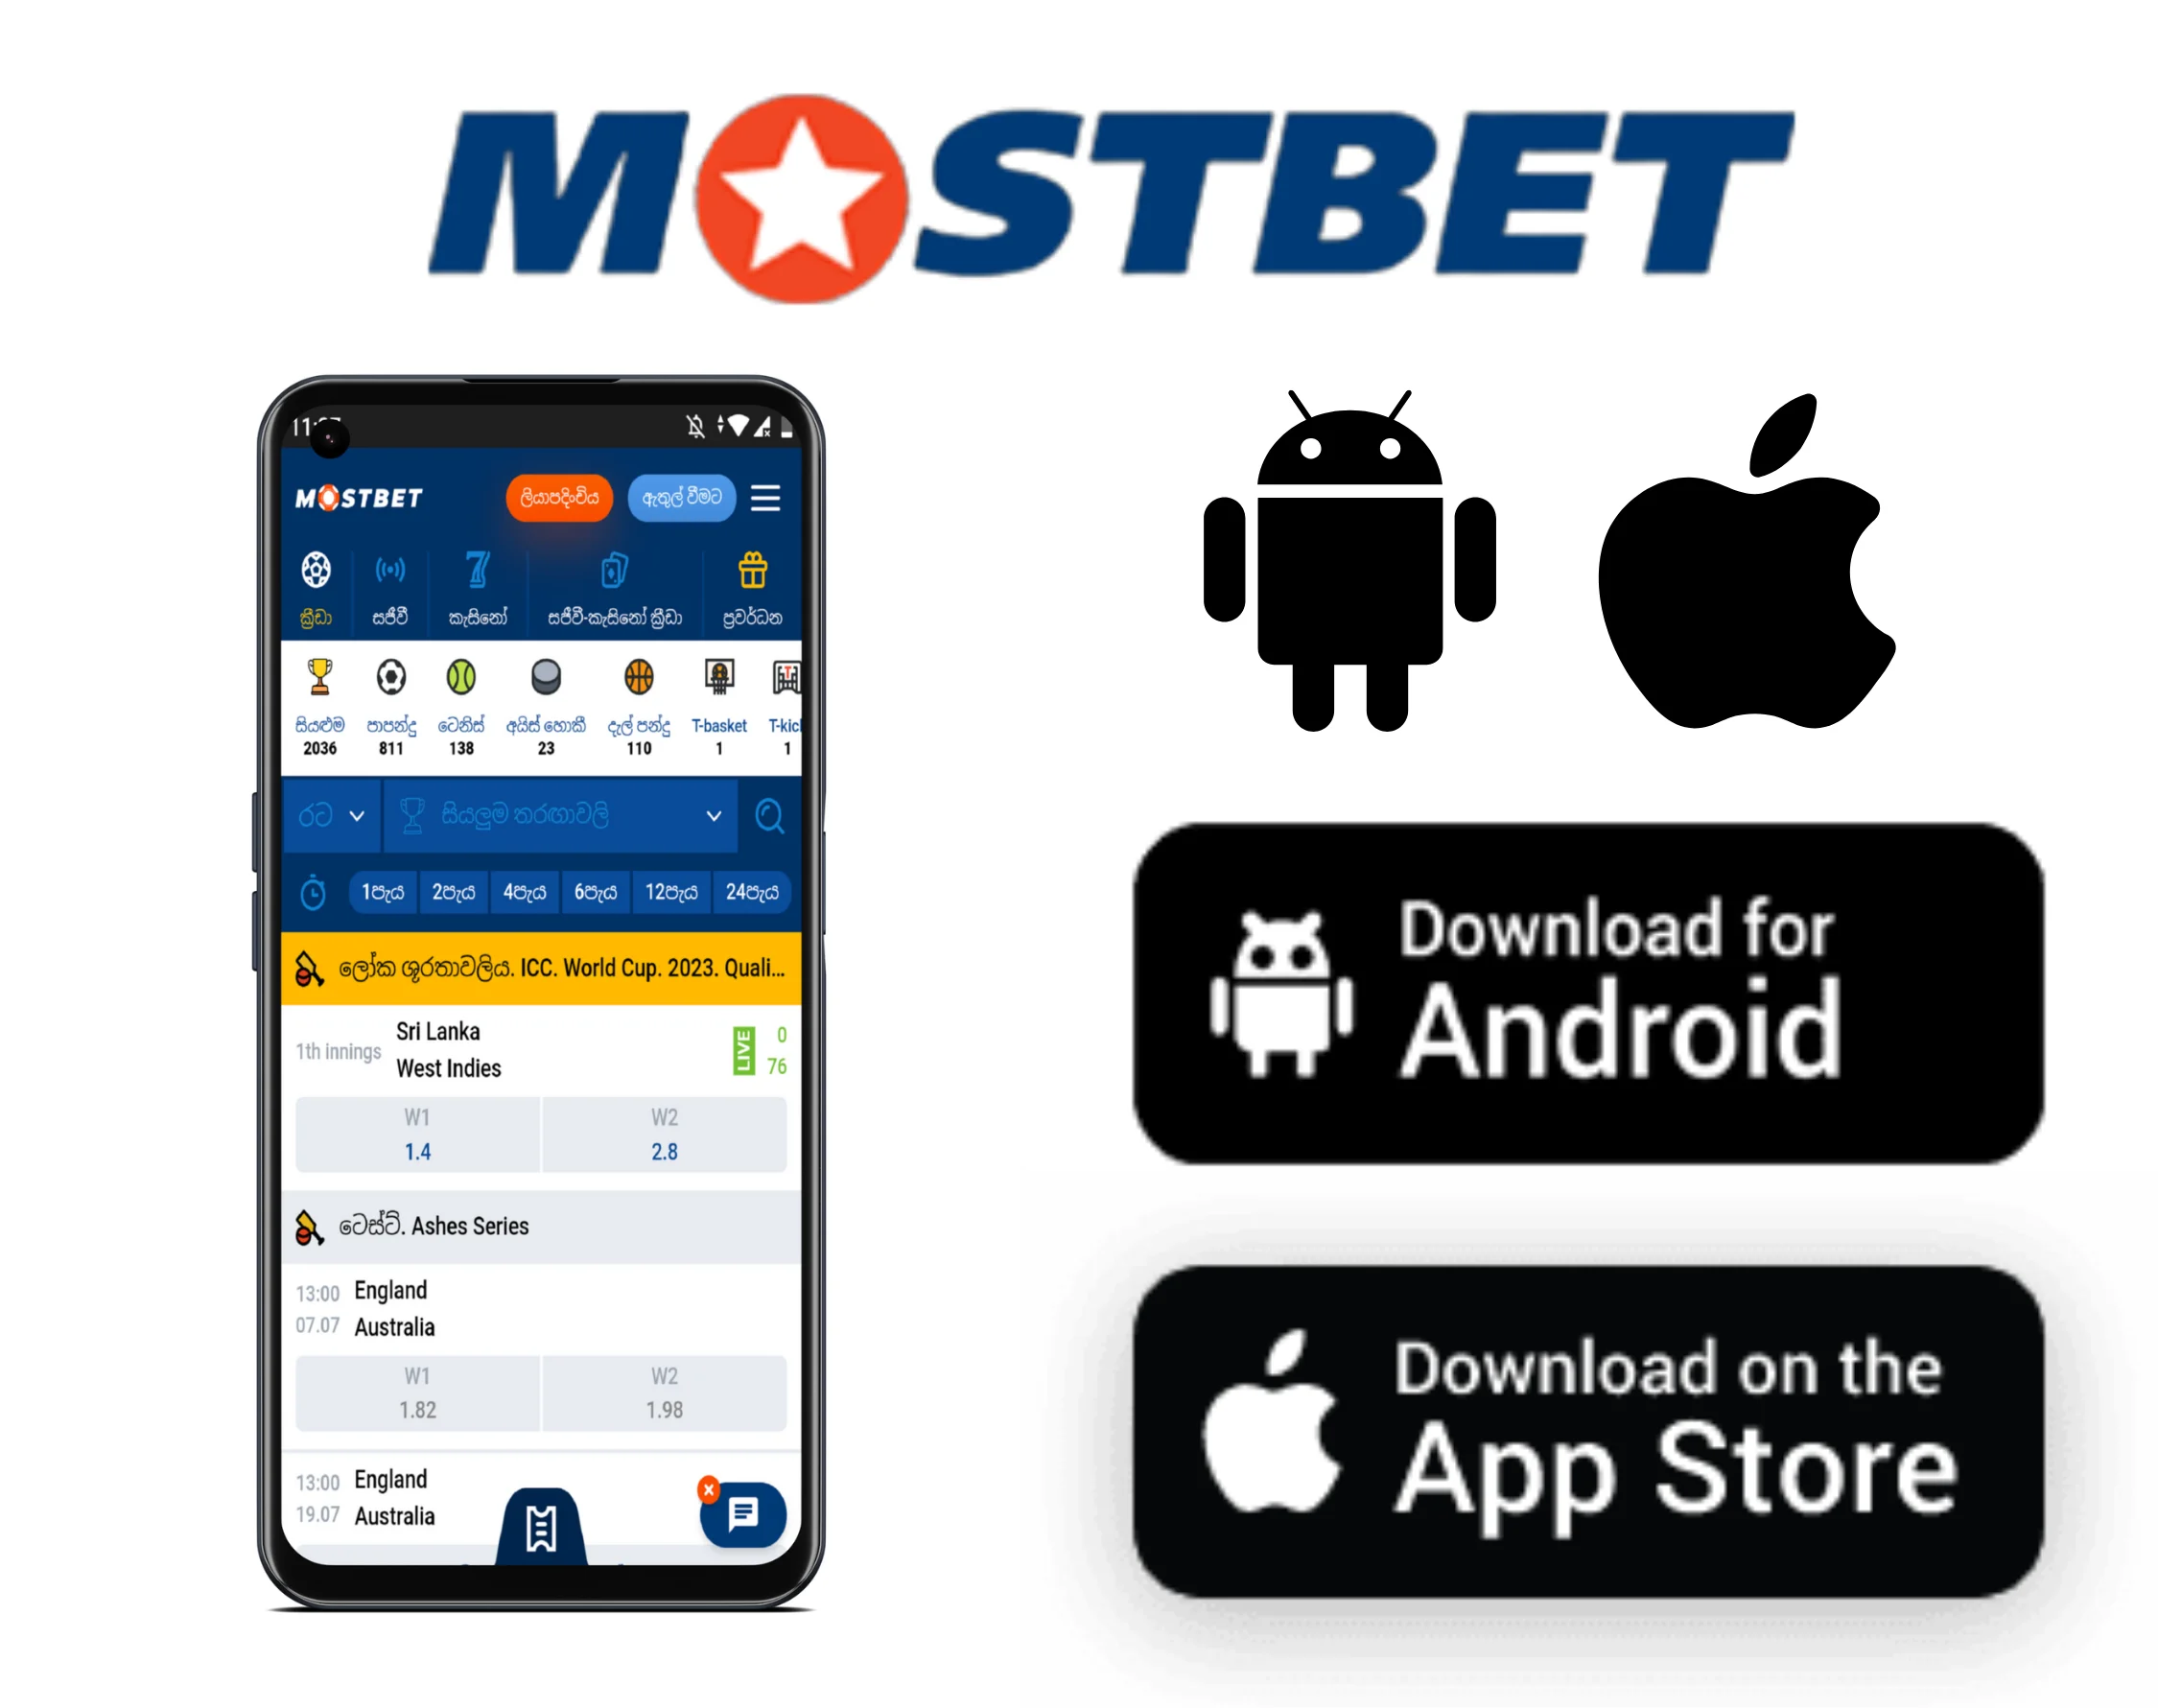 Mostbet BD-2 Betting Company and Online Casino in Bangladesh Fears – Death